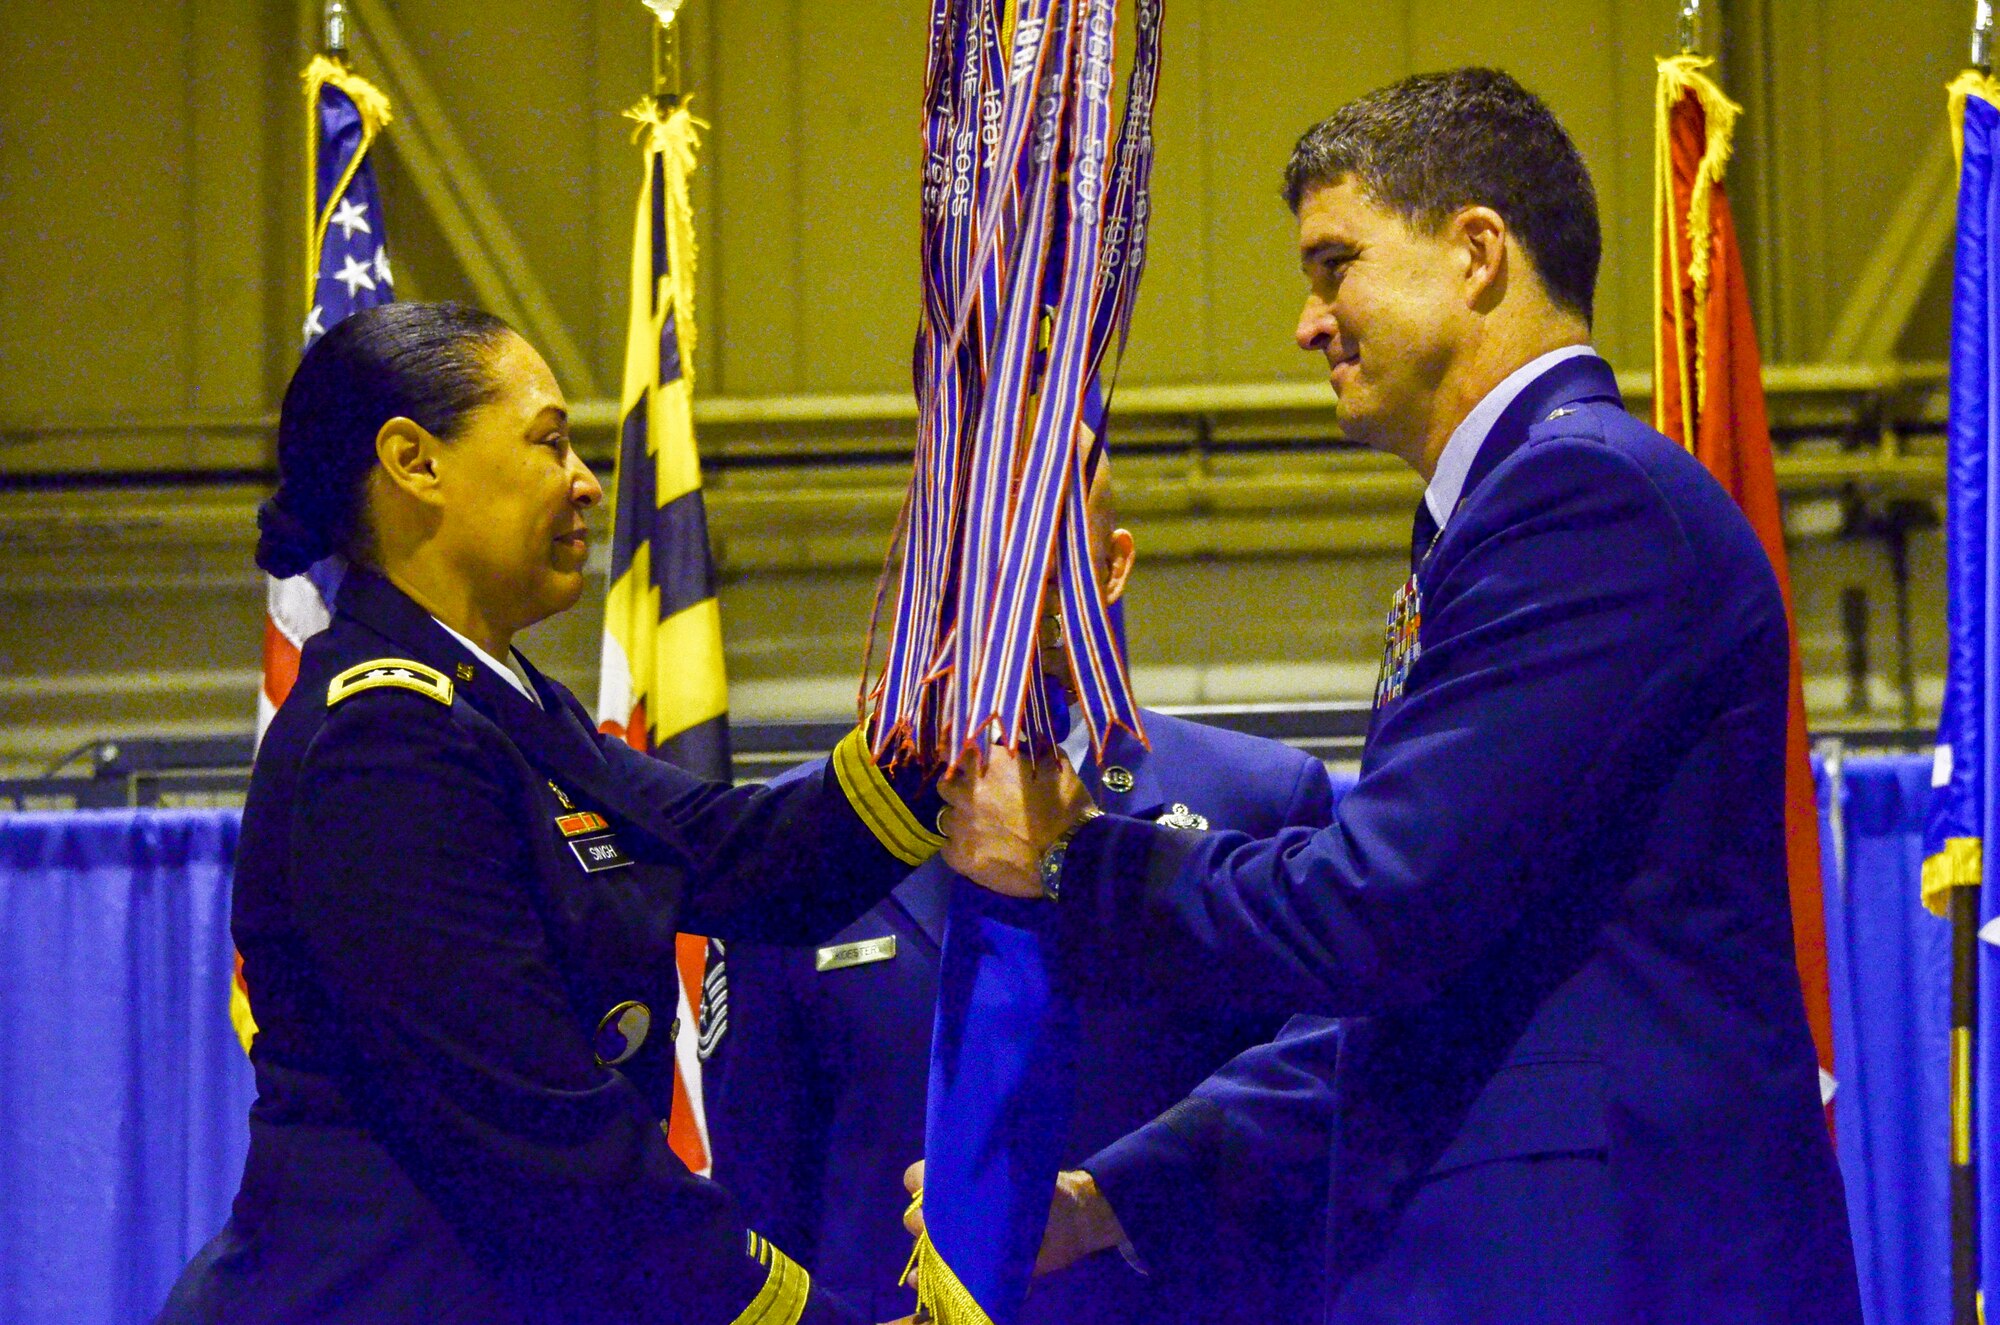 U.S Air Force Brig. Gen. Randolph Staudenraus, 175th Wing Commander, accepts the guidon from U.S. Army Maj. Gen. Linda Singh, Maryland National Guard Adjutant General at Warfield Air National Guard Base, Baltimore, Md., during a change of command ceremony December 6, 2015. During the ceremony Brig. Gen. Randolph Staudenraus assumed command of the 175th Wing from Brig. Gen. Scott L. Kelly.(U.S. Air National Guard photo by Tech. Sgt. David Speicher/RELEASED) 